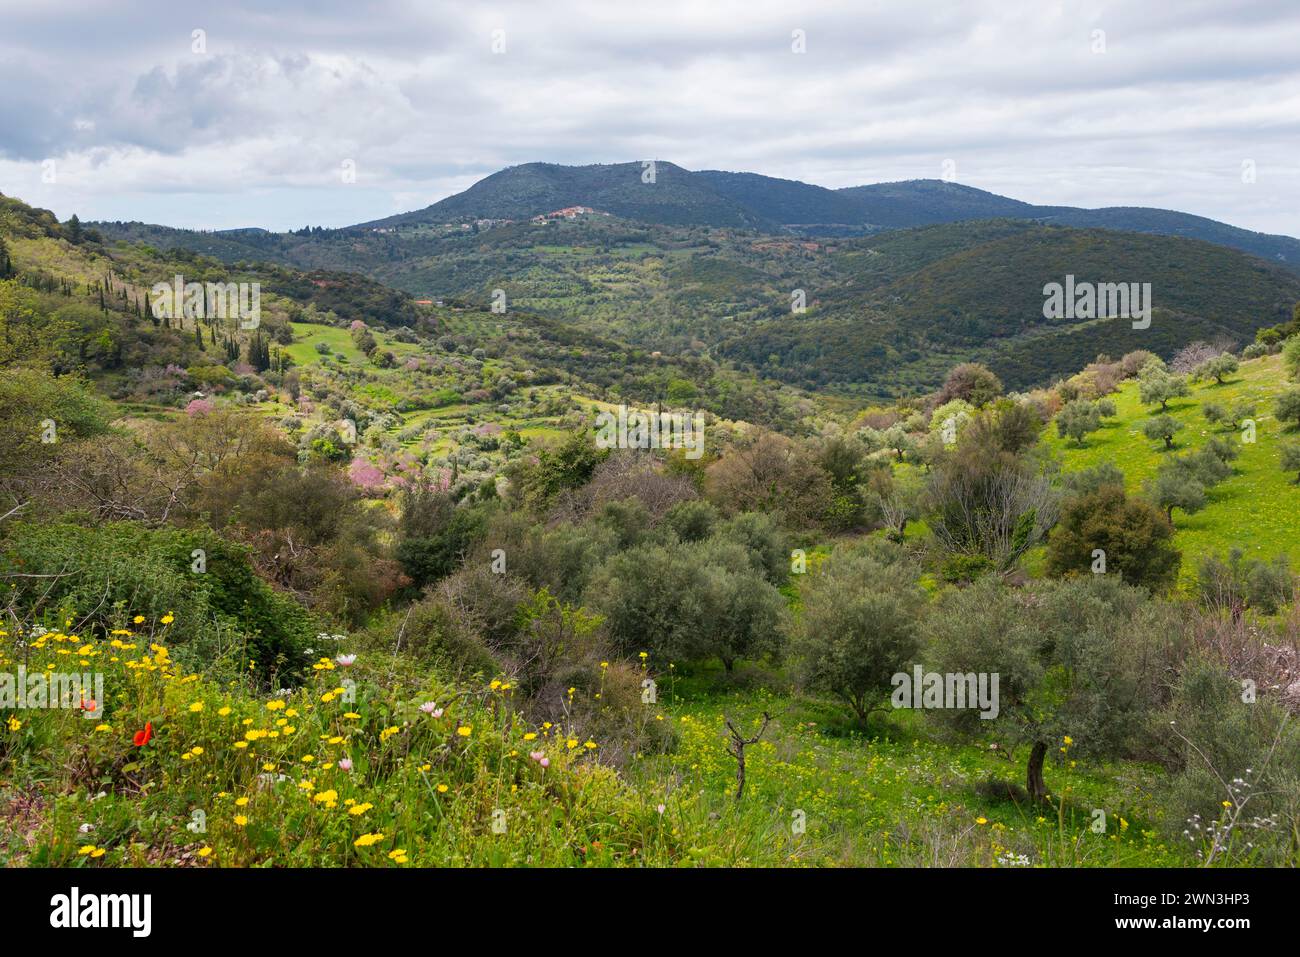 View of a peaceful, lush green landscape with mountains and cloudy sky in the background, near Platania, Peloponnese, Greece Stock Photo